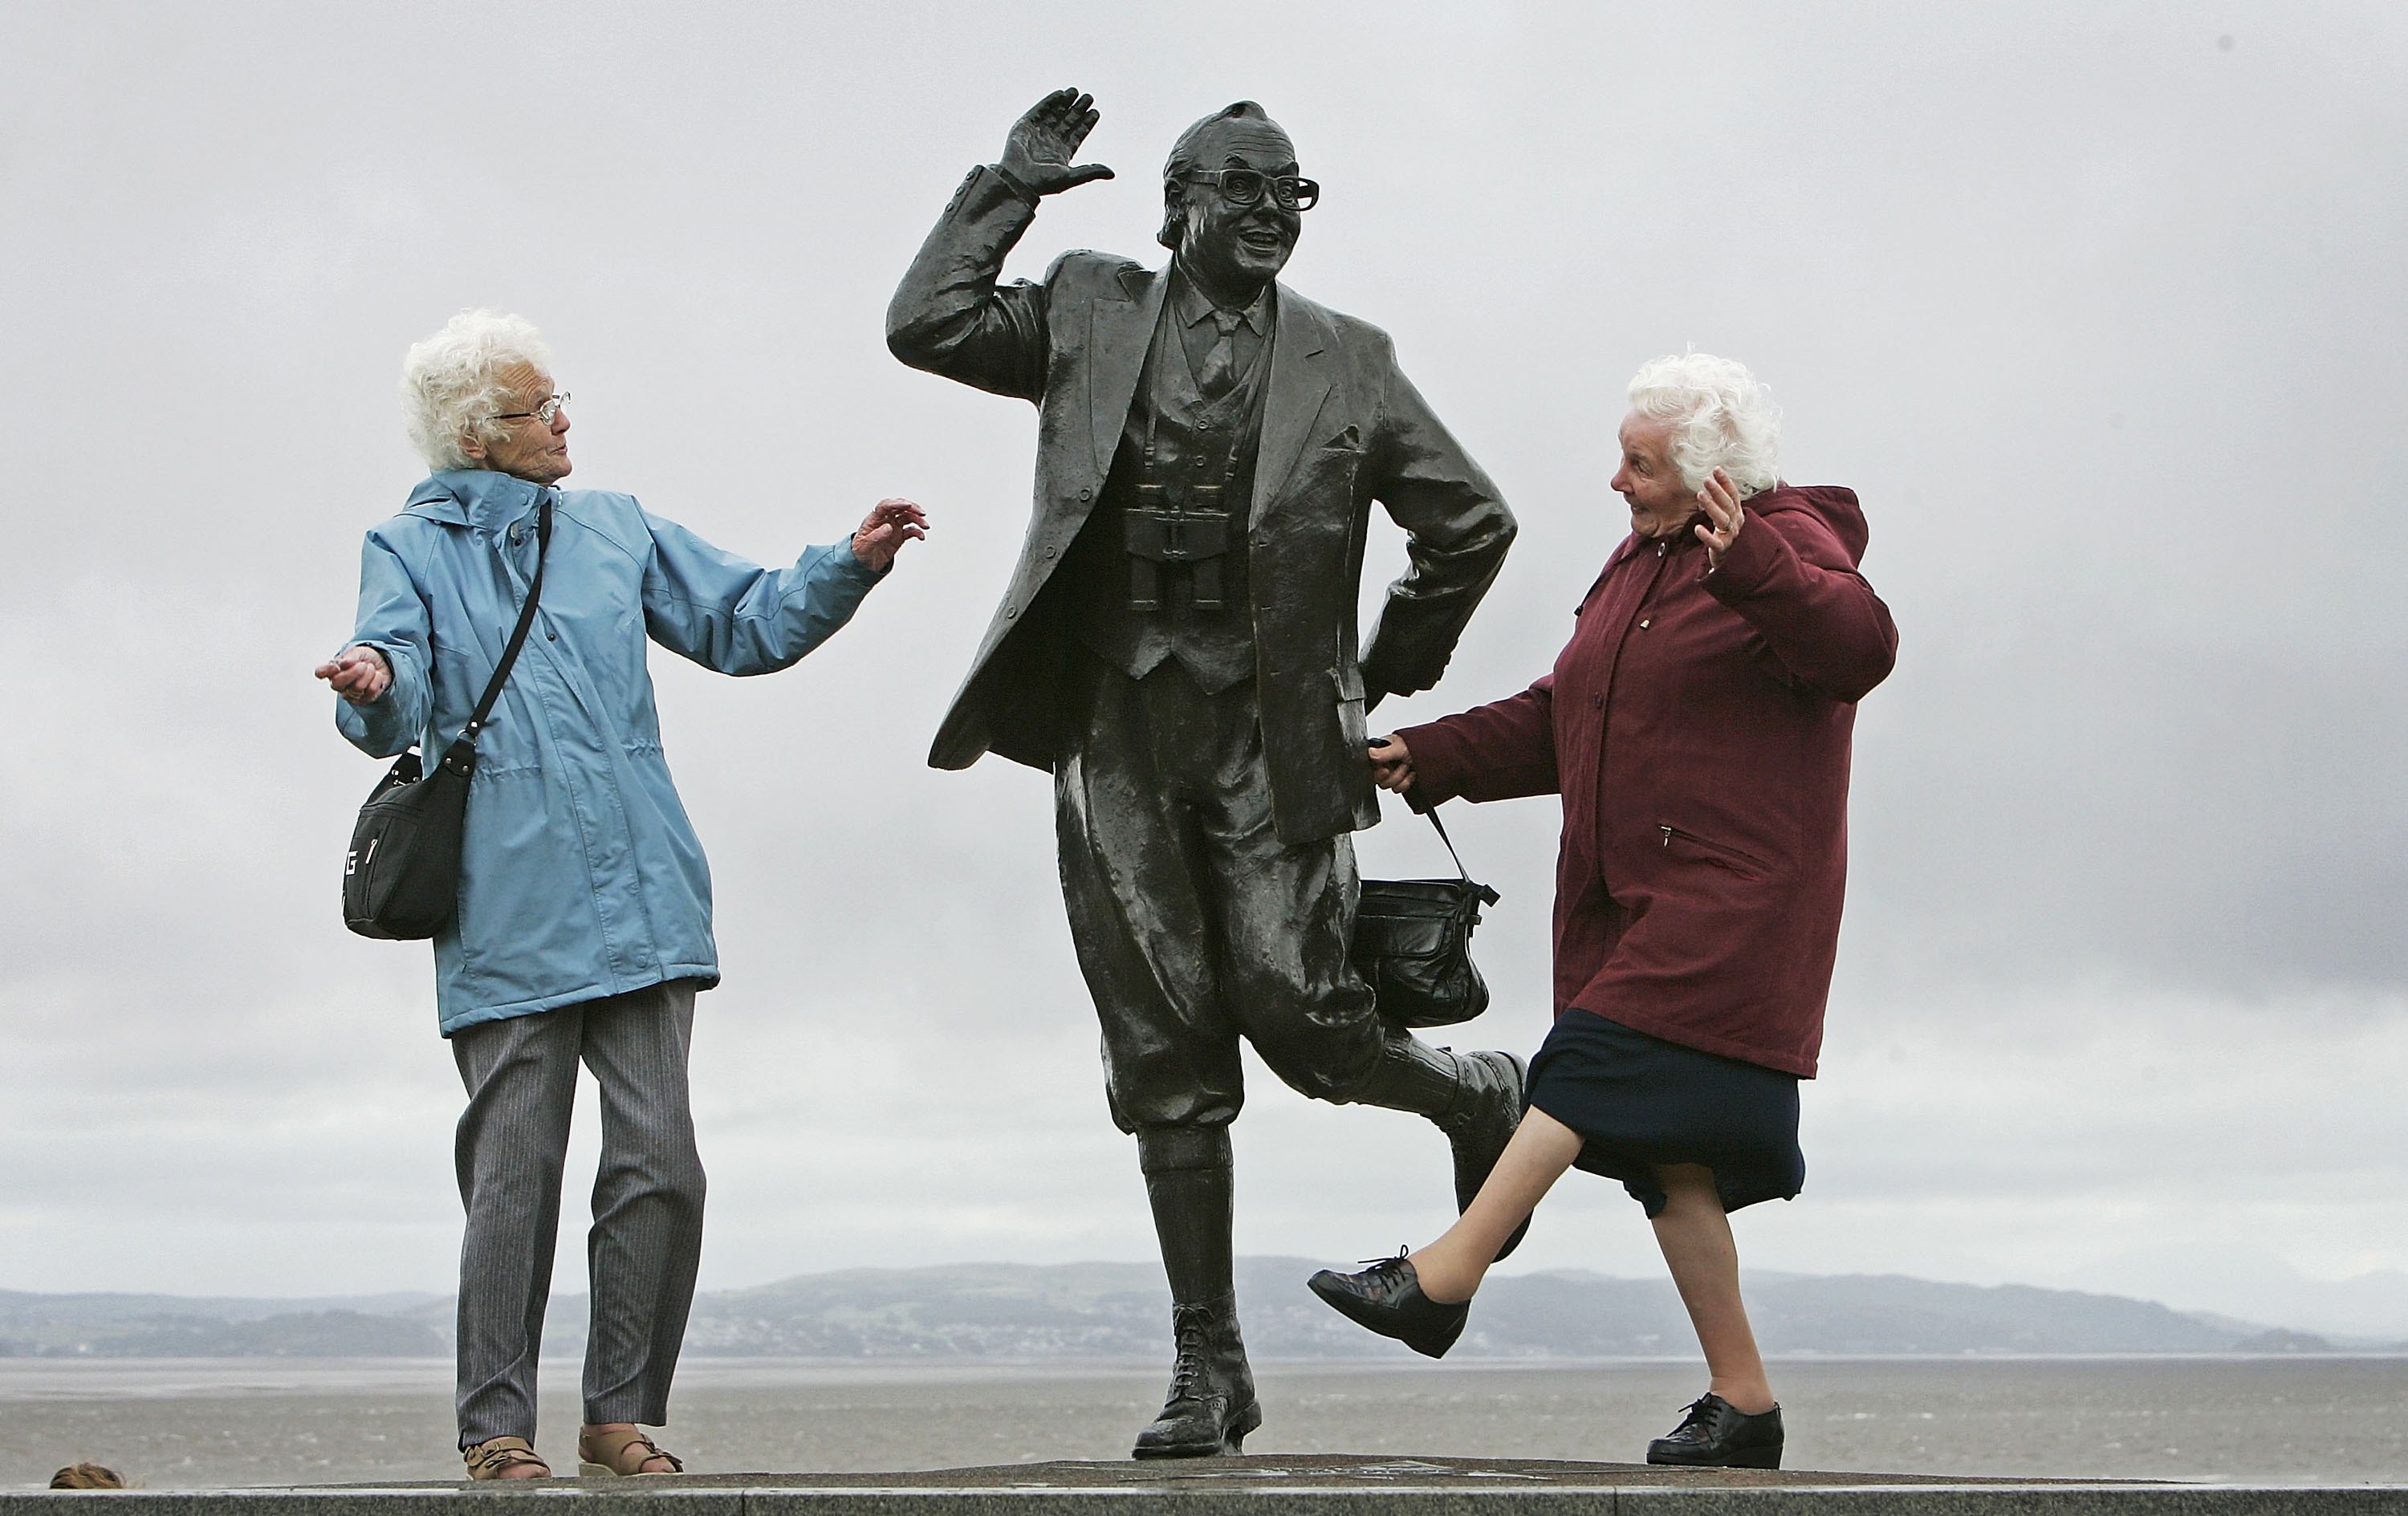 Save up now, and in your golden years, you, too, can be happy enough to dance with a statue.